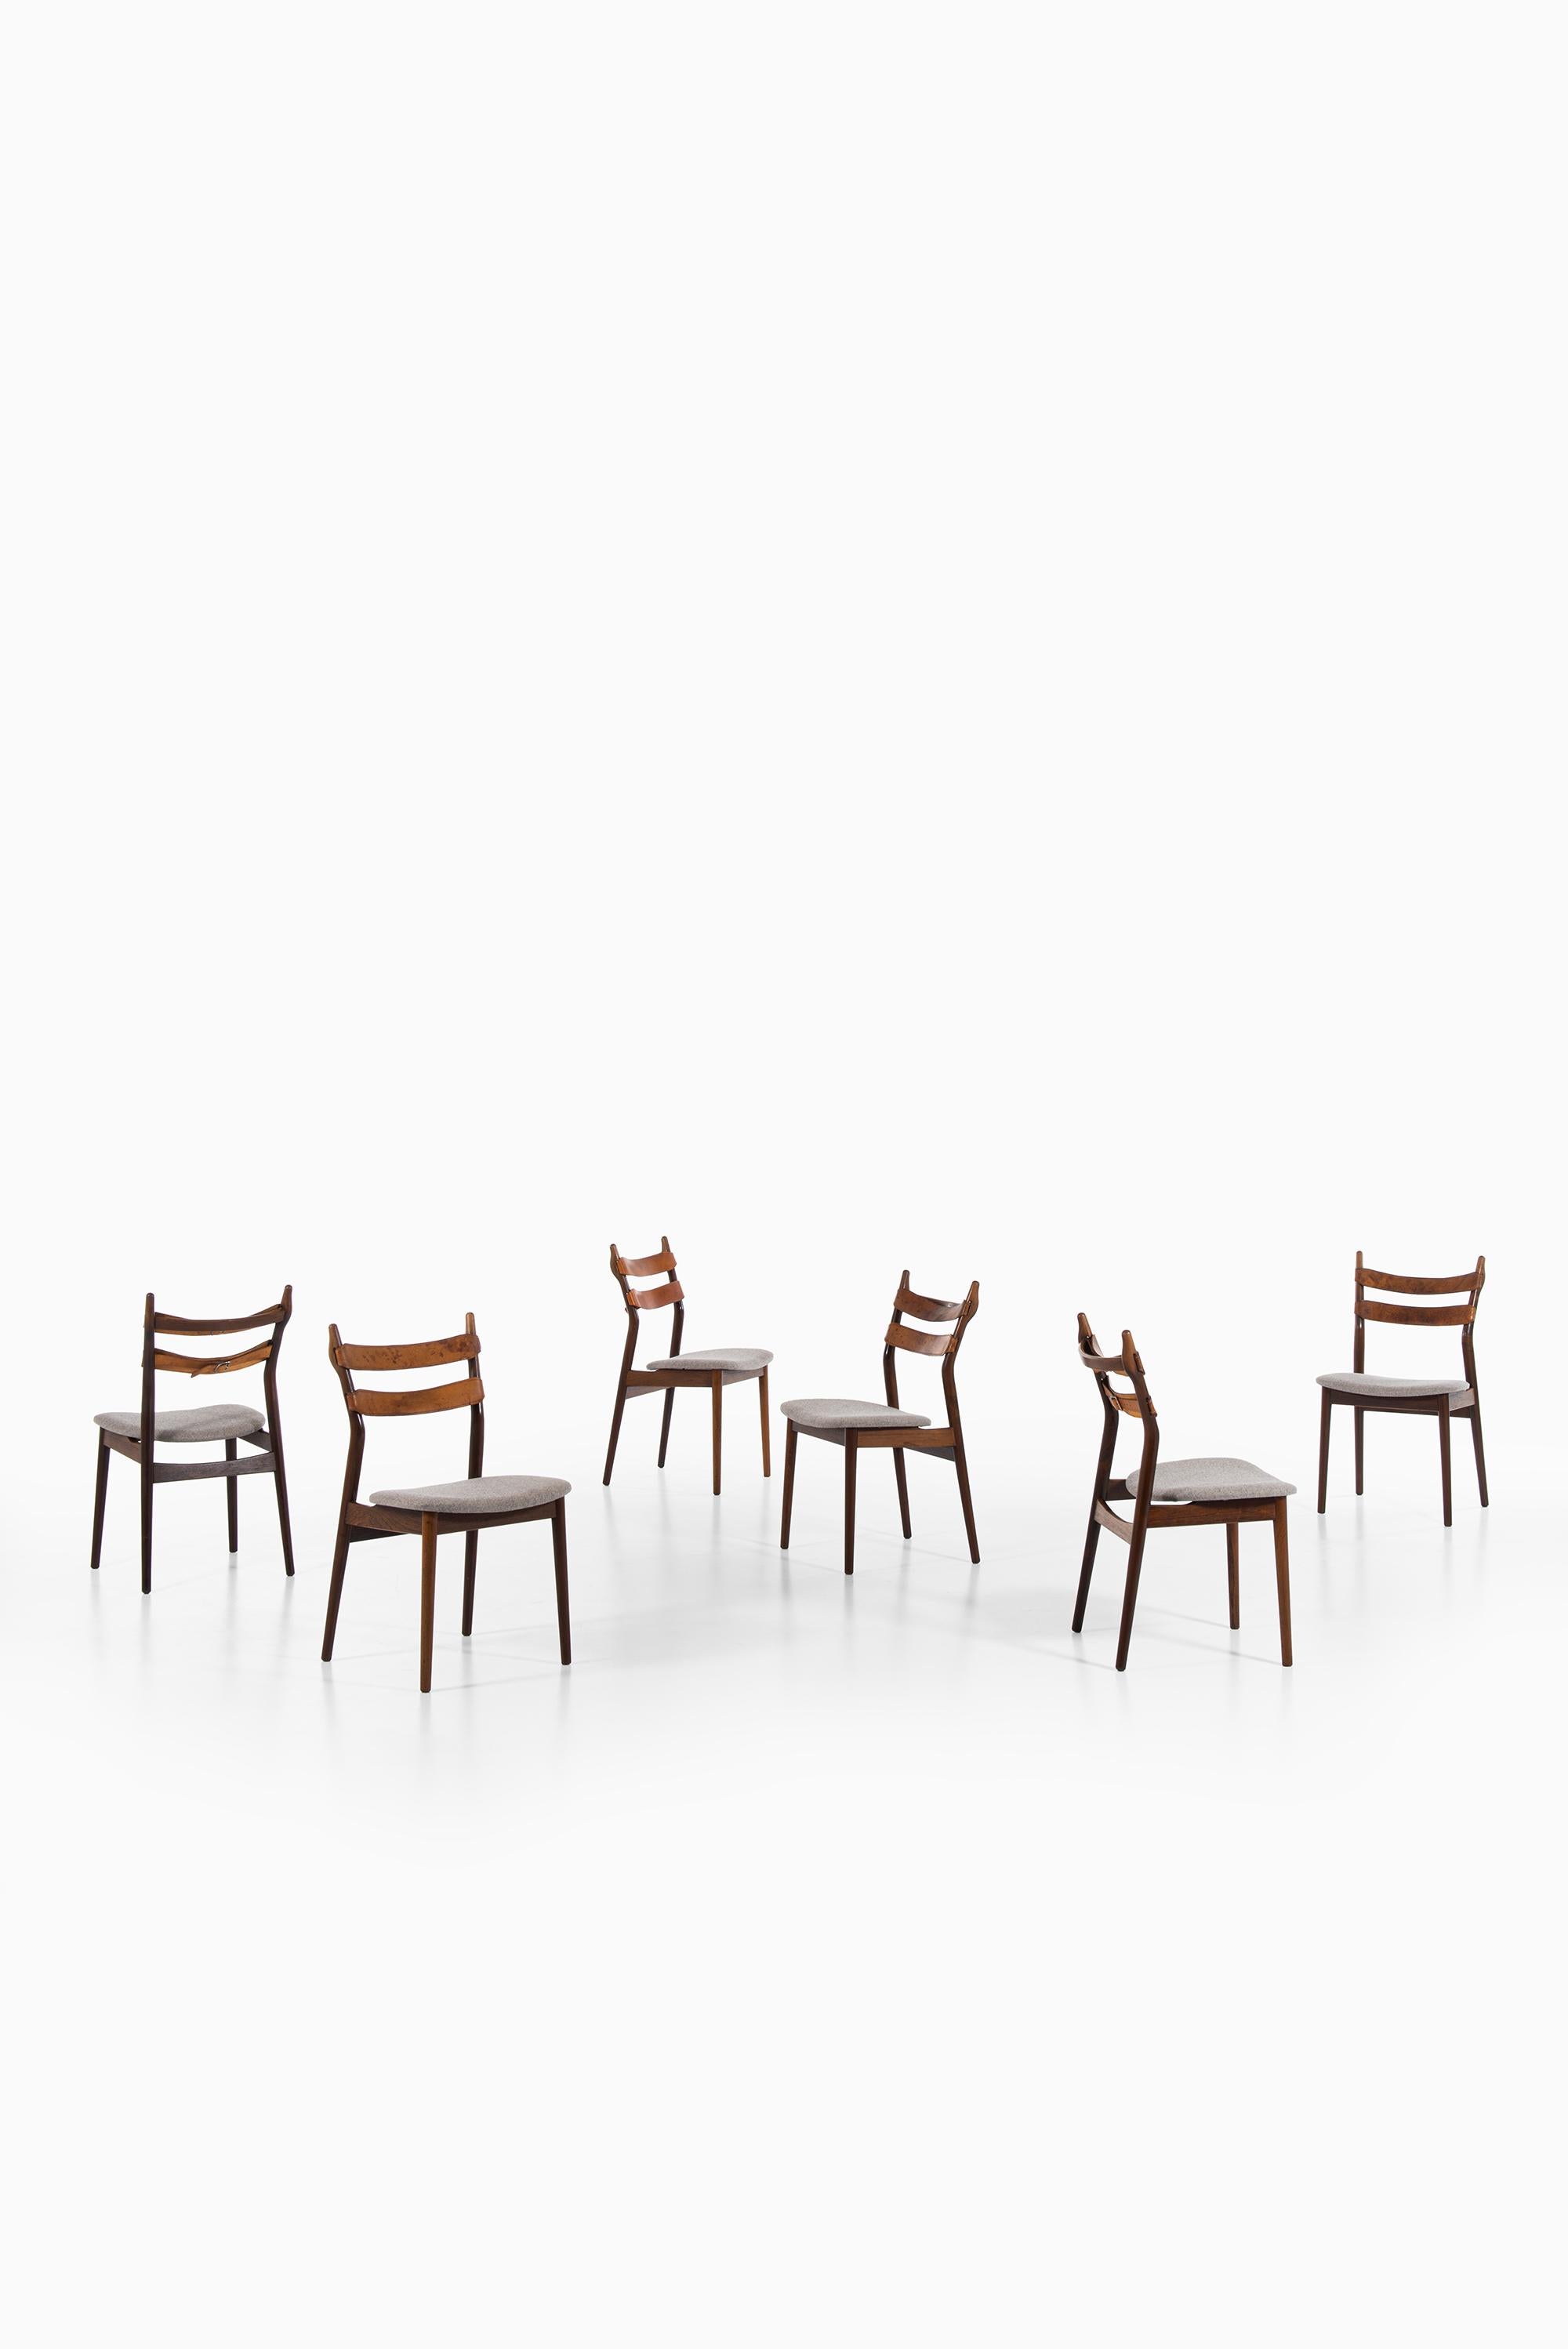 Rare set of 6 dining chairs model 59 designed by Helge Sibast. Produced by Sibast møbelfabrik in Denmark.